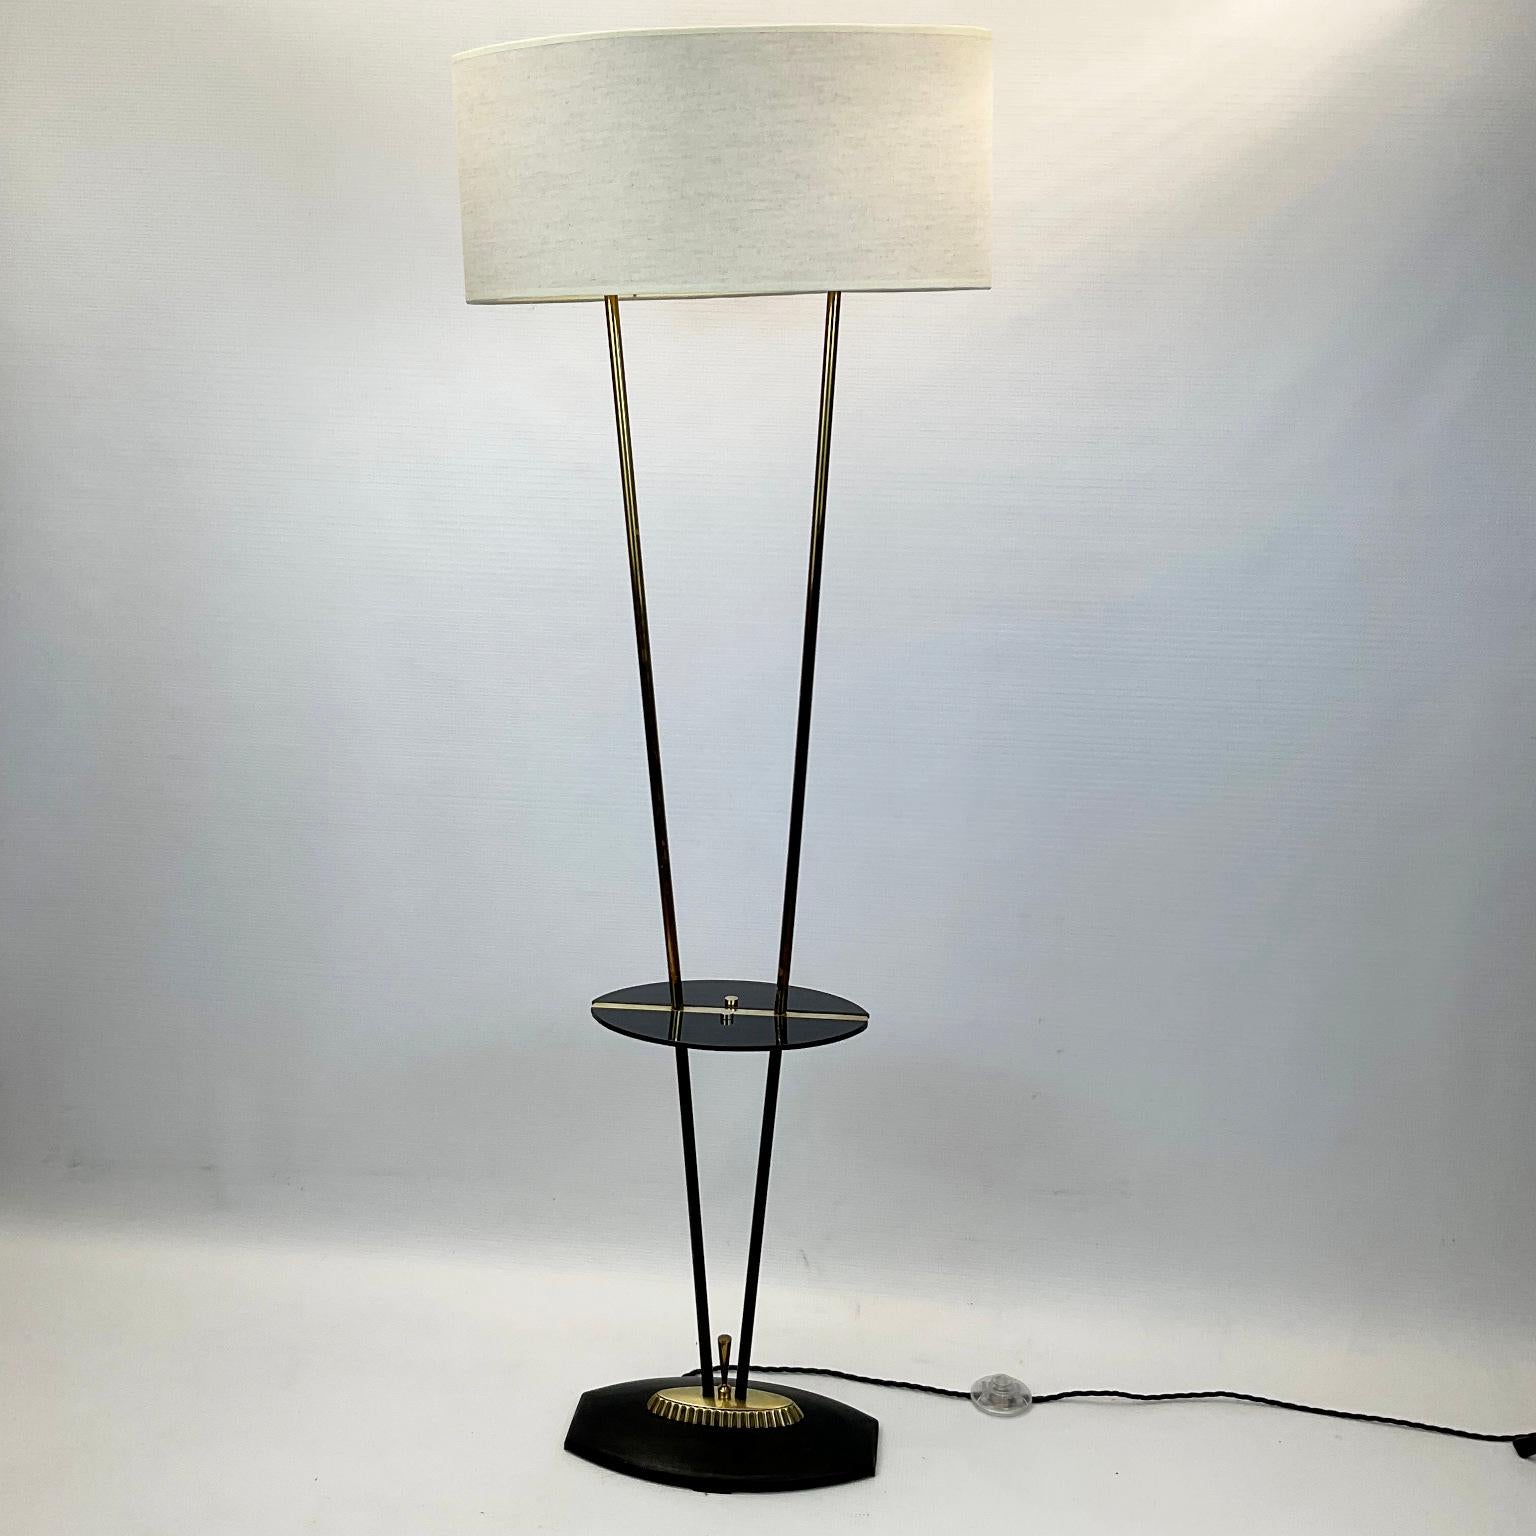 A 1950s floor lamp with two arms in brass, attributed to Maison Lunel France, with an elliptical linen lampshade comprising two bulbs and a small black glass tablet. Rewired with new insulated cable and an online new foot-switch.
Dimensions :
130cm